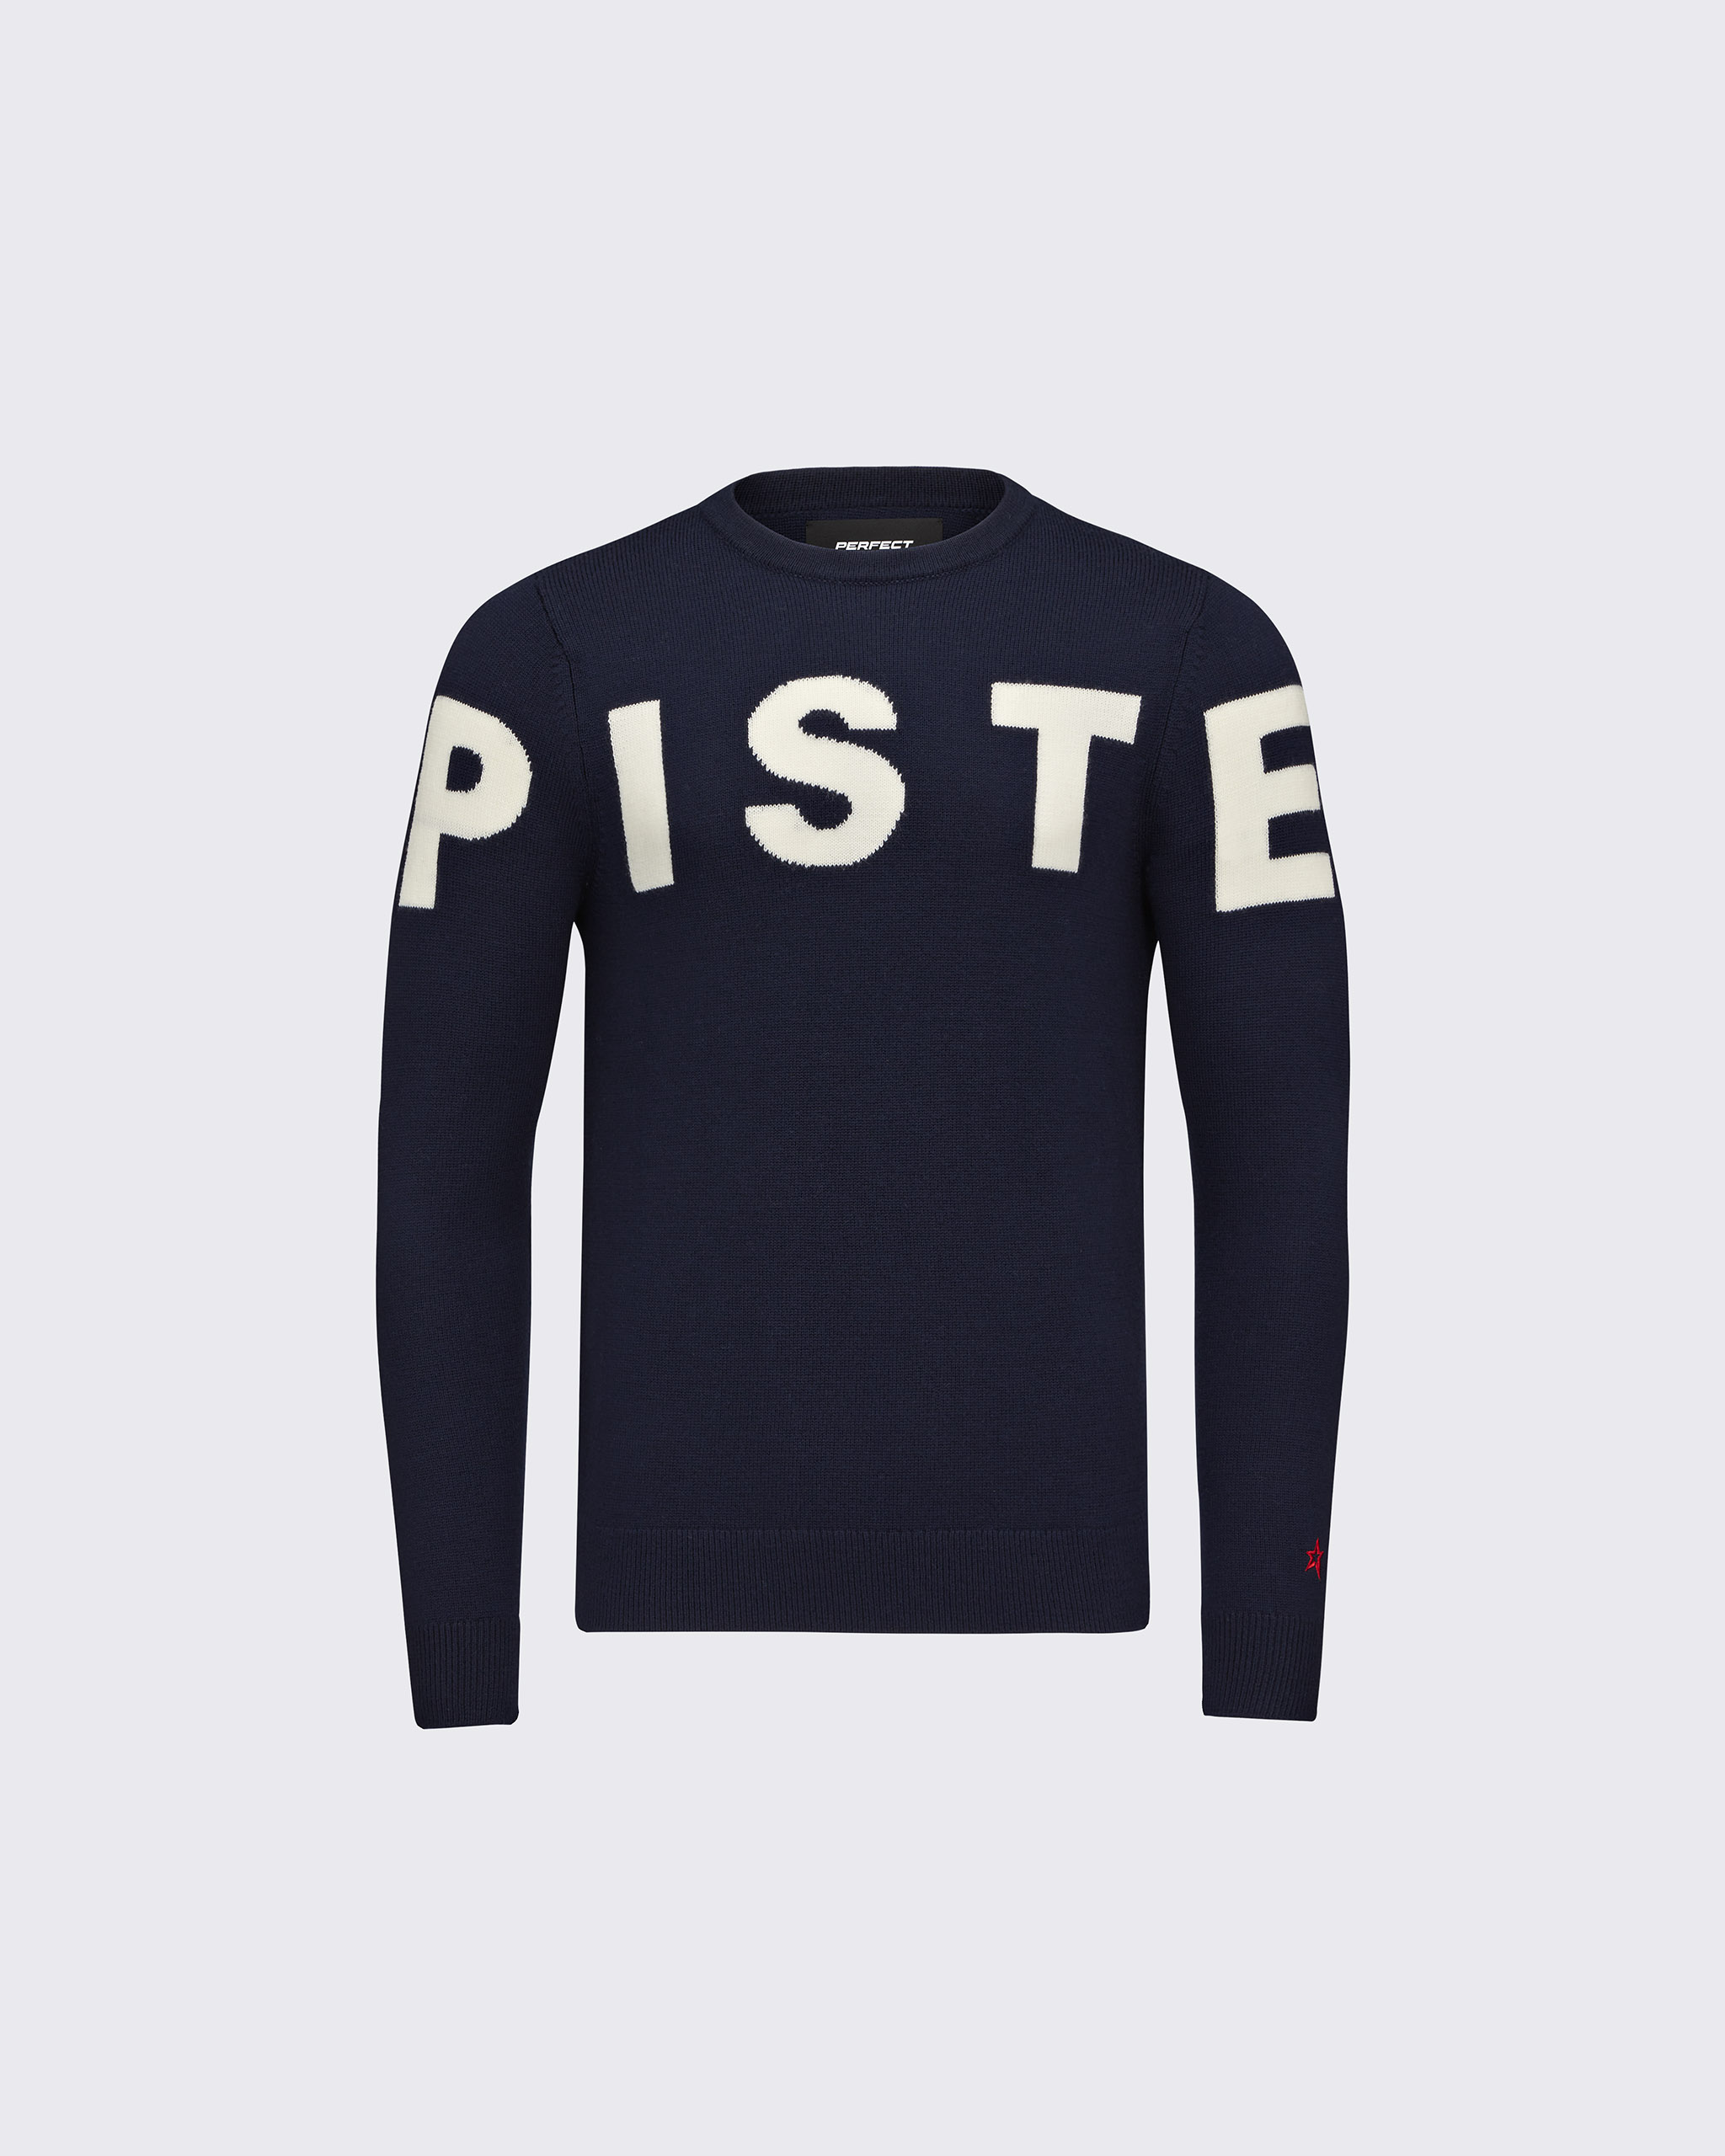 Shop Perfect Moment Piste Sweater In Navy